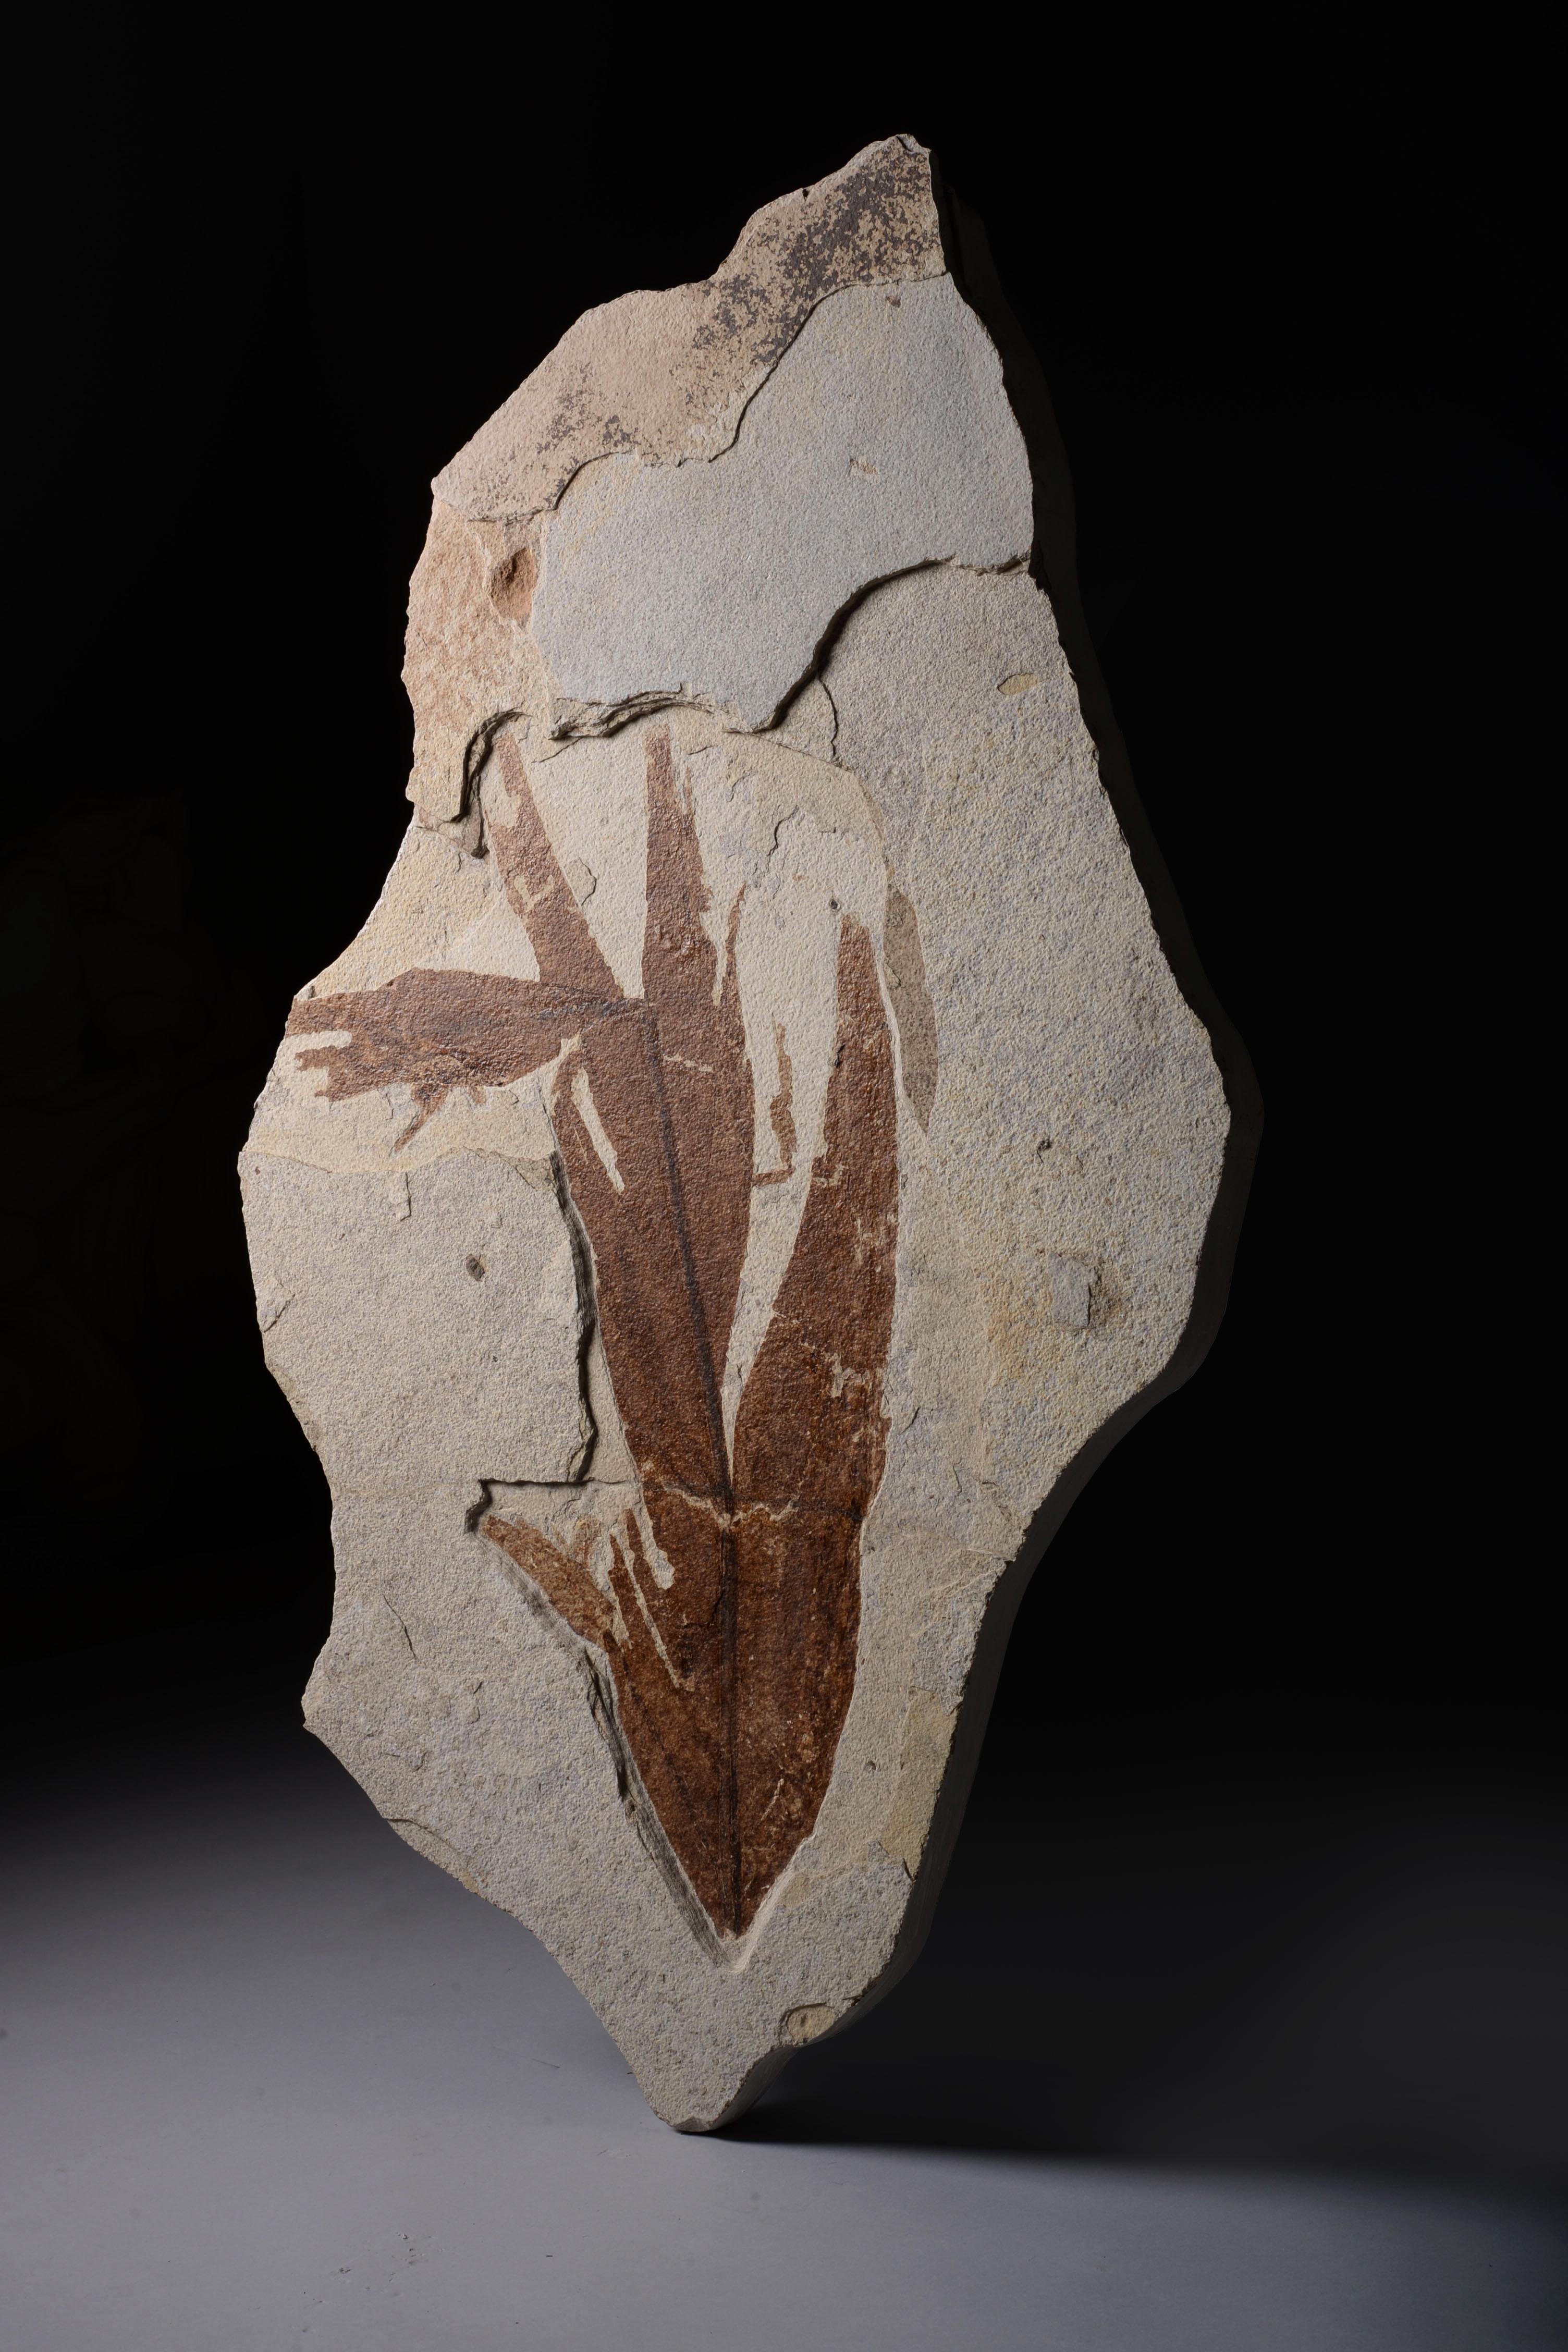 A large and beautifully preserved fossilised leaf from the Green River formation, a site which has brought forth some of the best-preserved fossilised vegetation in the world. This example is elegantly composed and entirely natural.

With bracket at